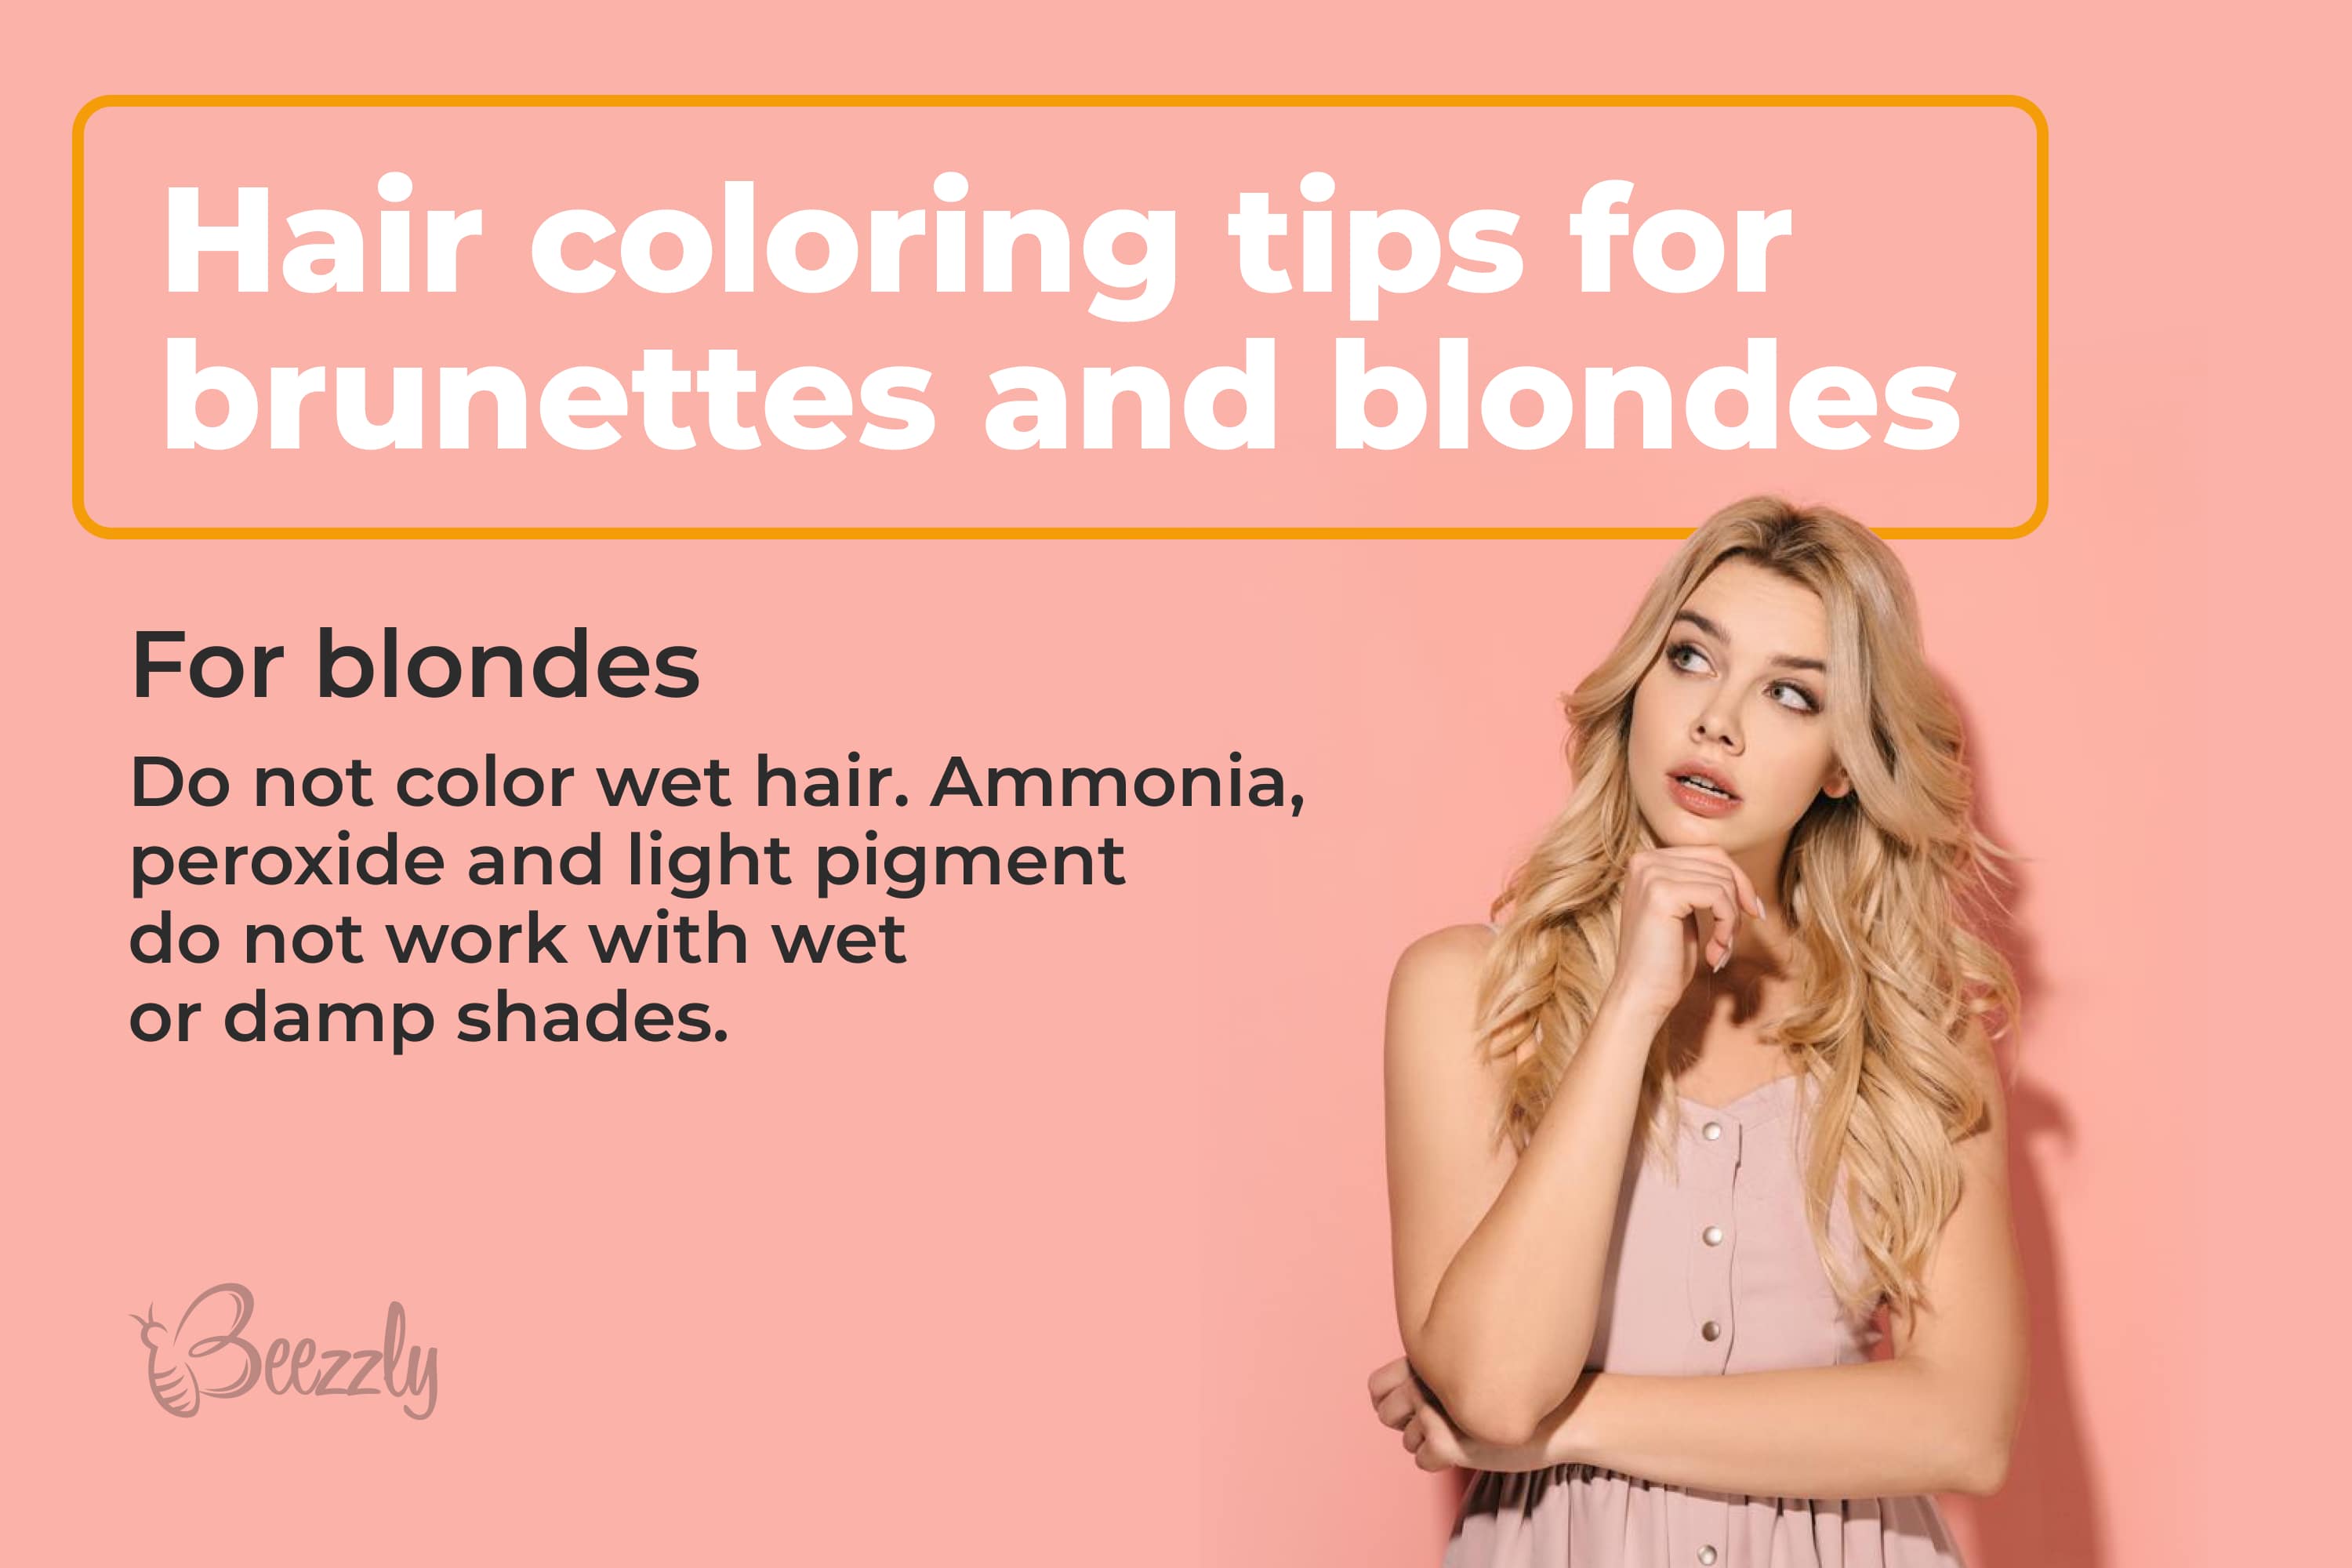 Hair coloring tips for blondes